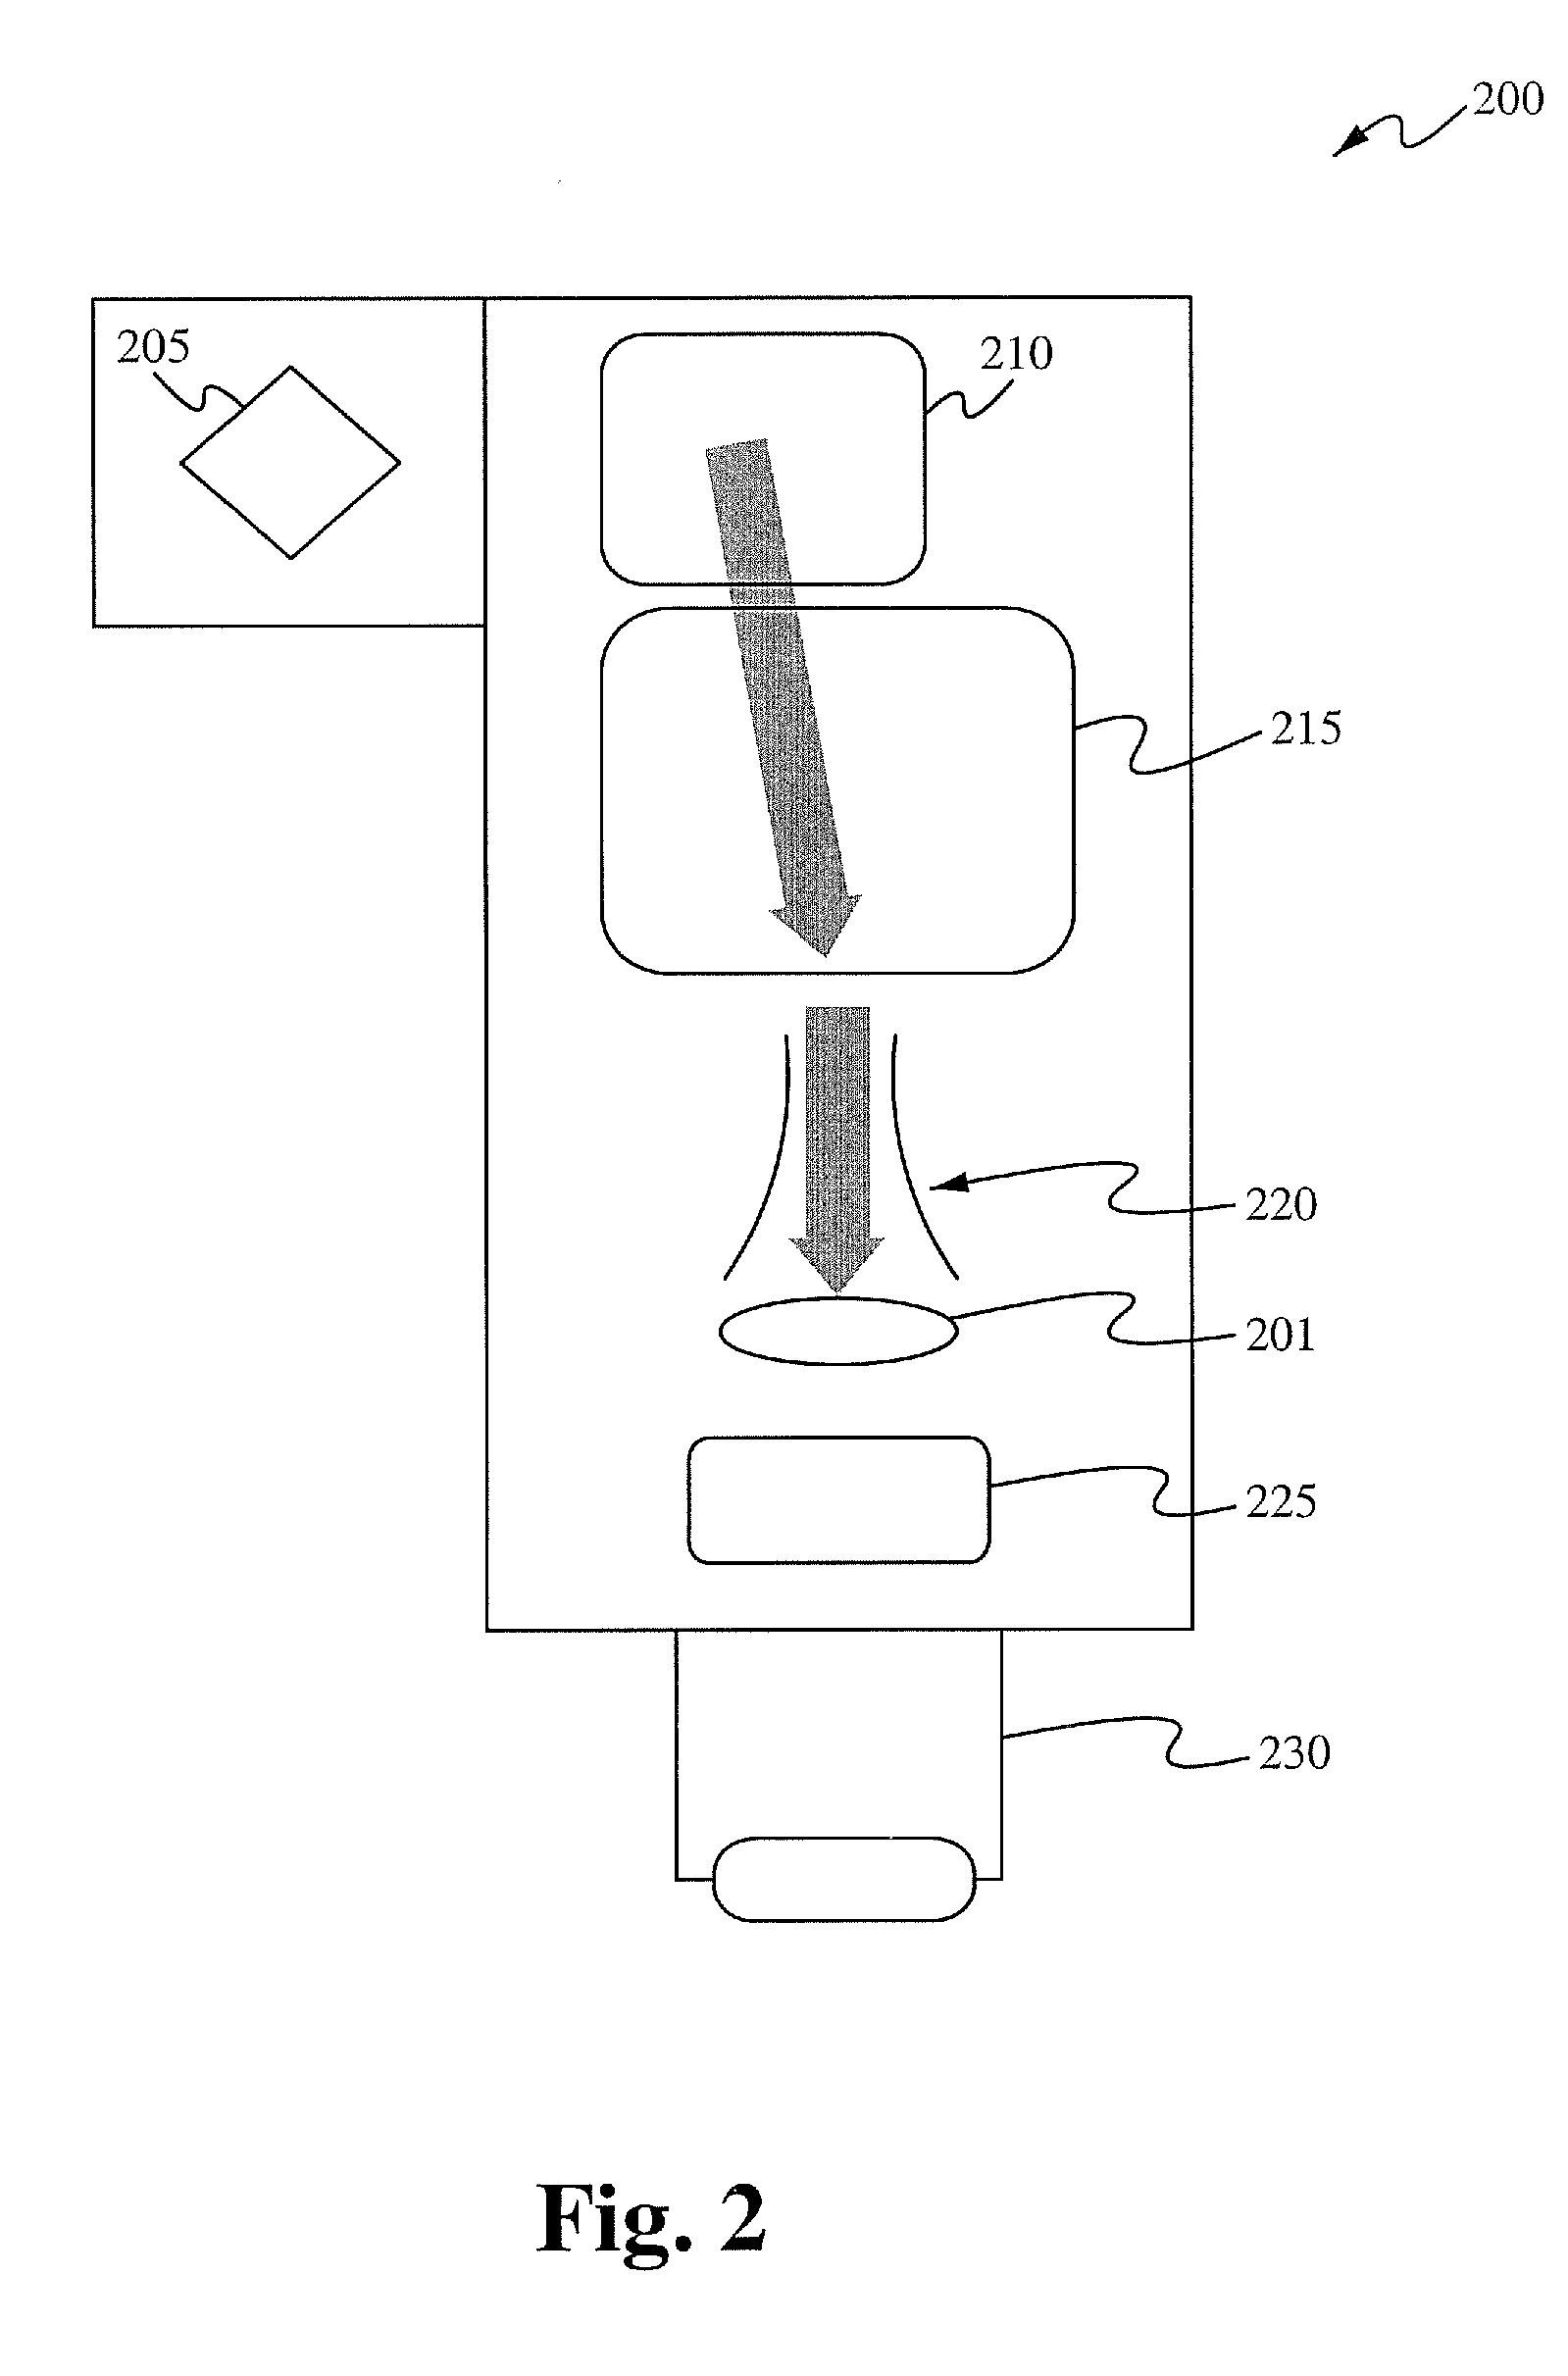 Application specific implant system and method for use in solar cell fabrications